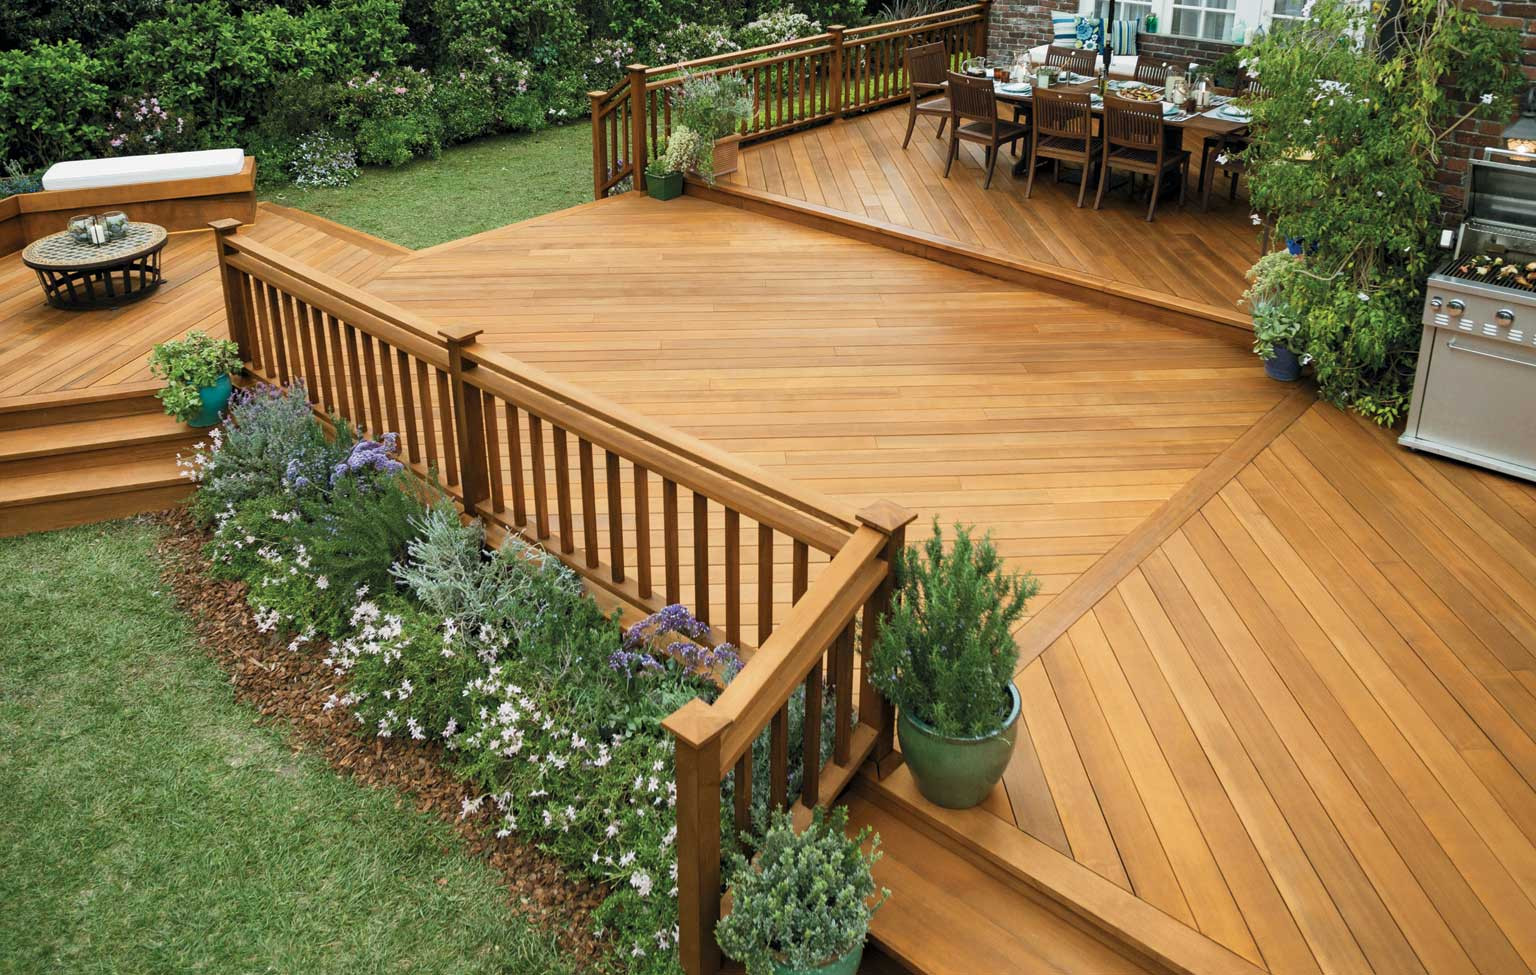 Wood Deck Paint Colors
 Deck Stain Colors For White Houses